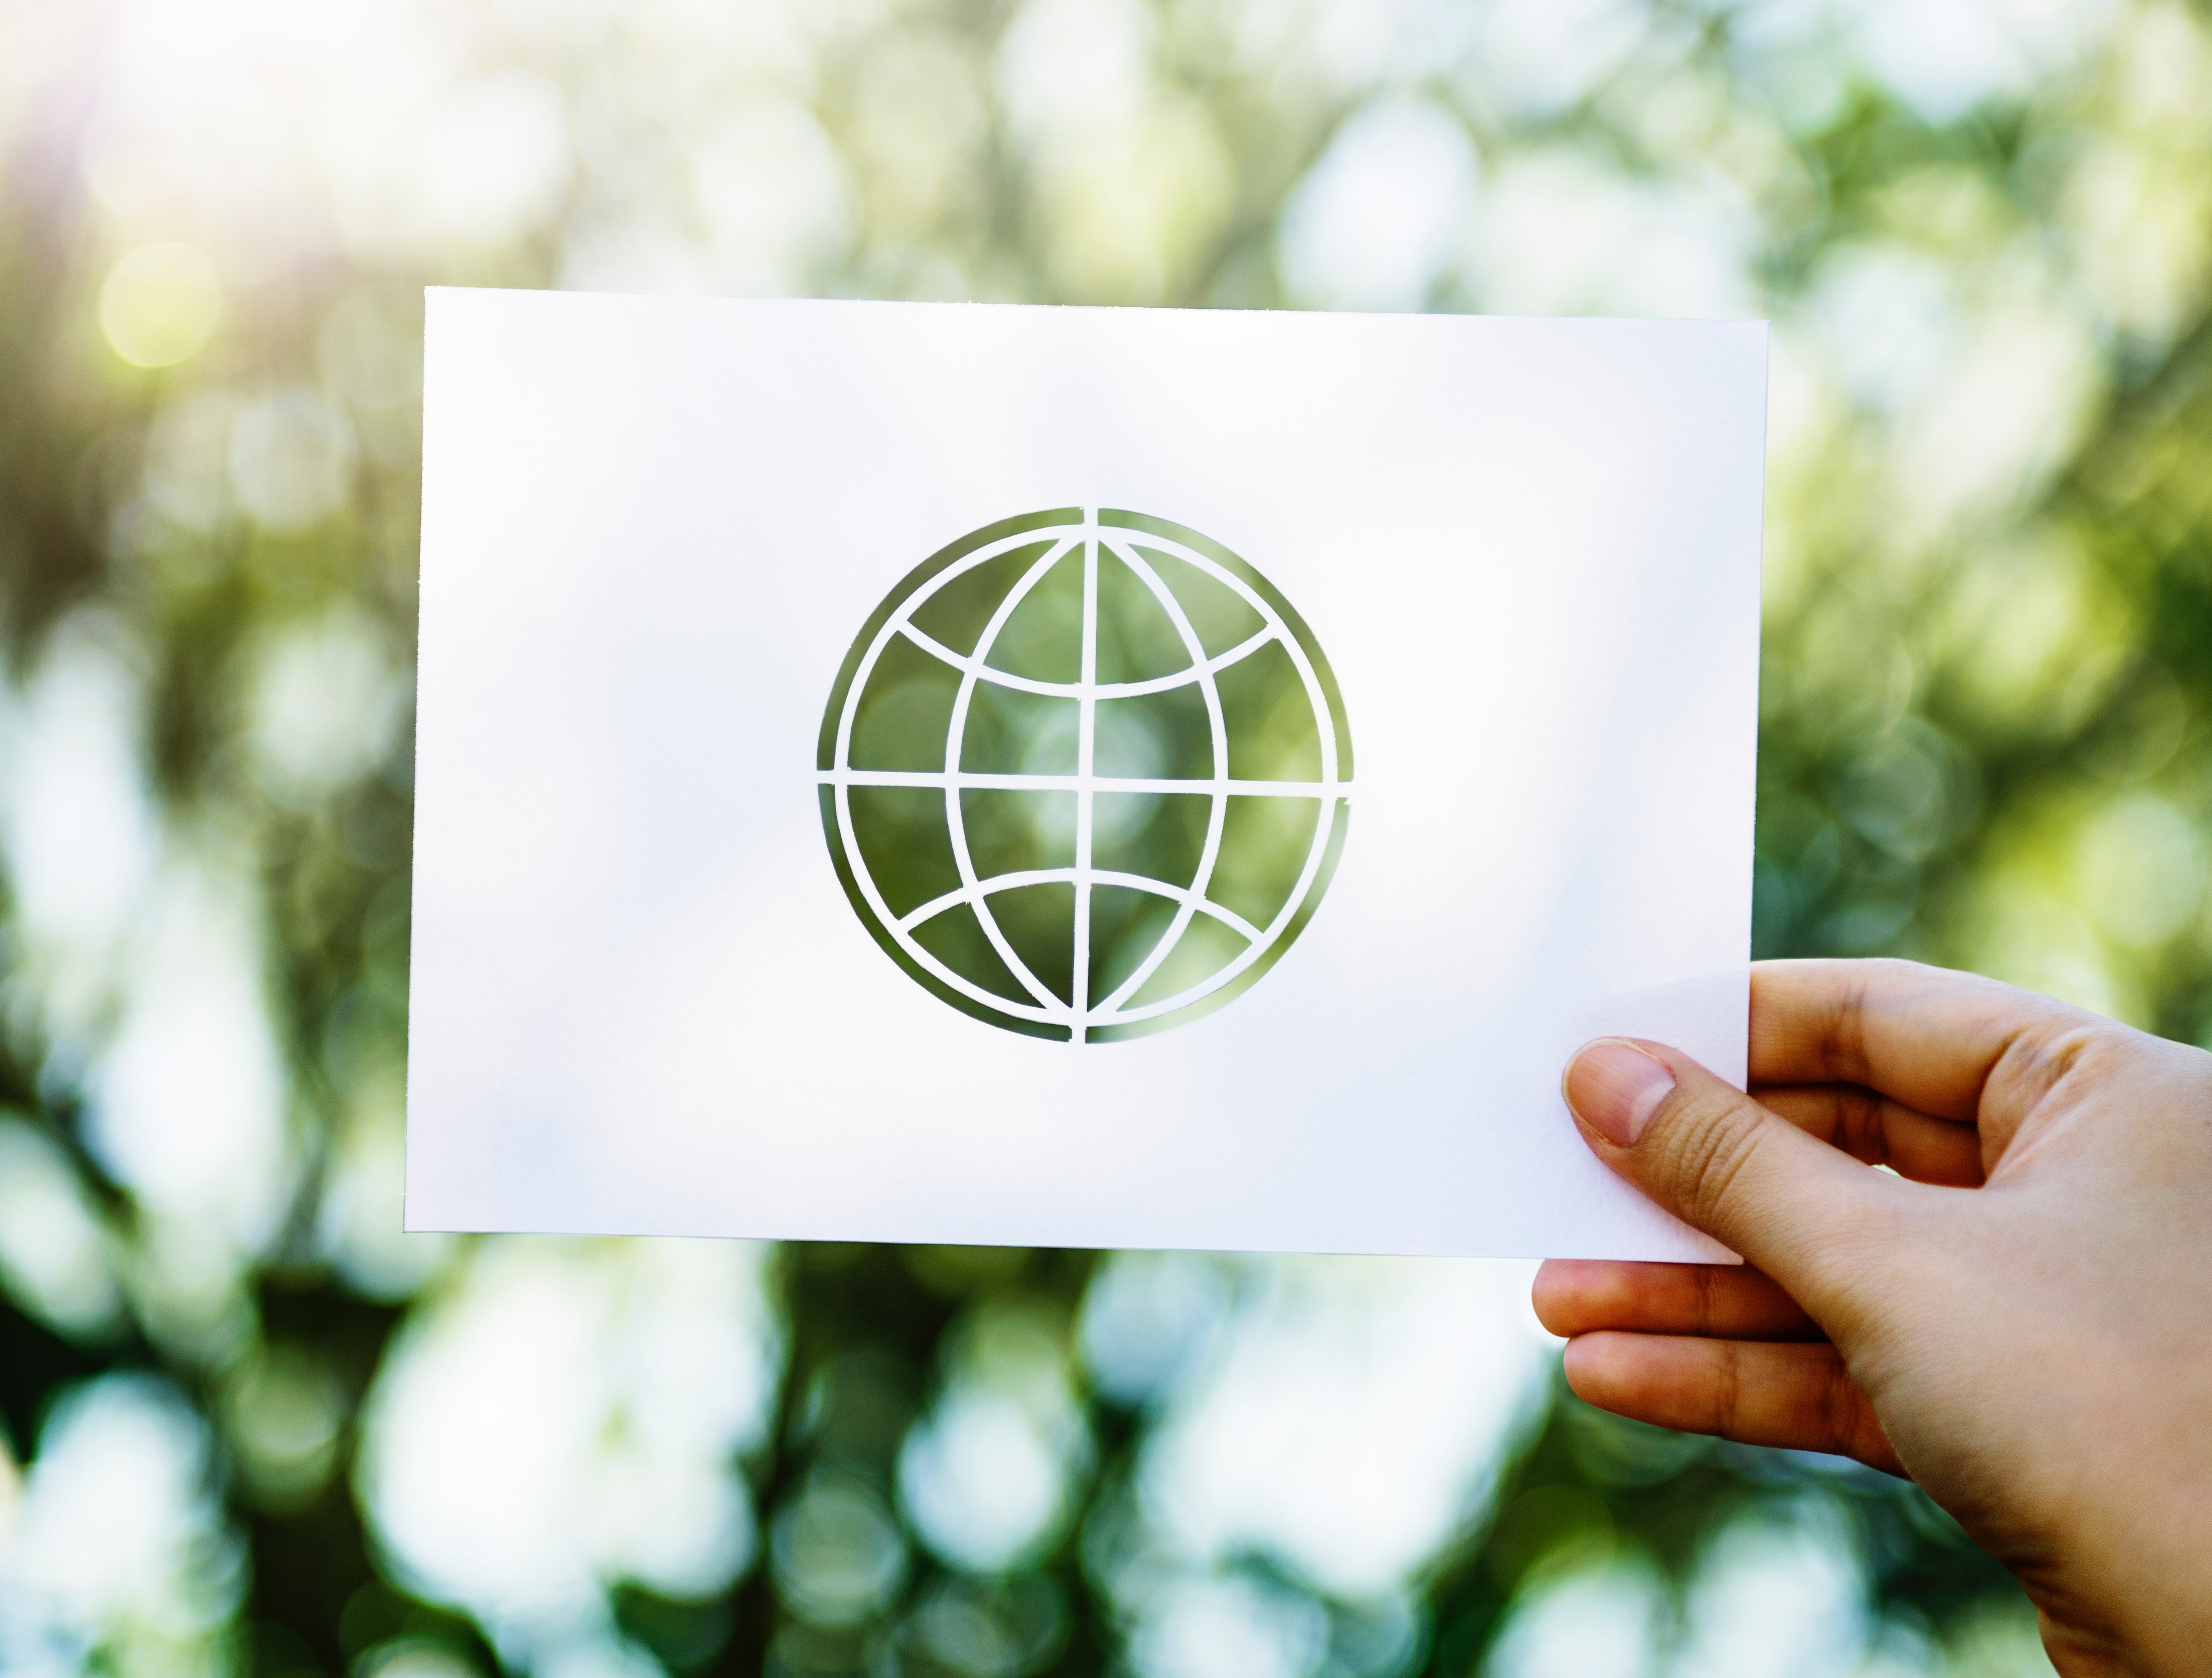 Paper cut of a globe in front of blurry green leaves in the background